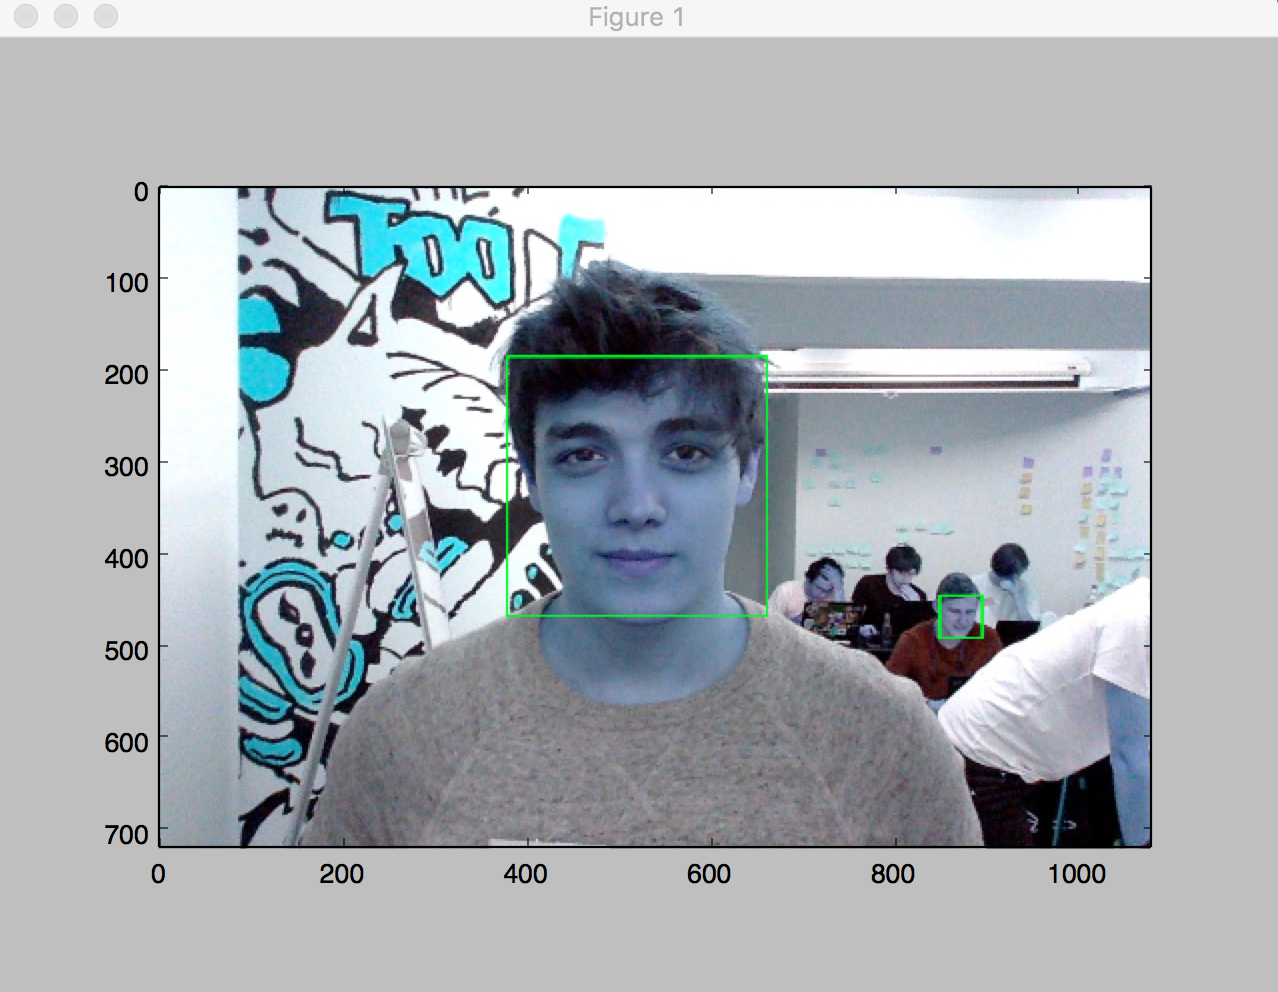 Example face detection